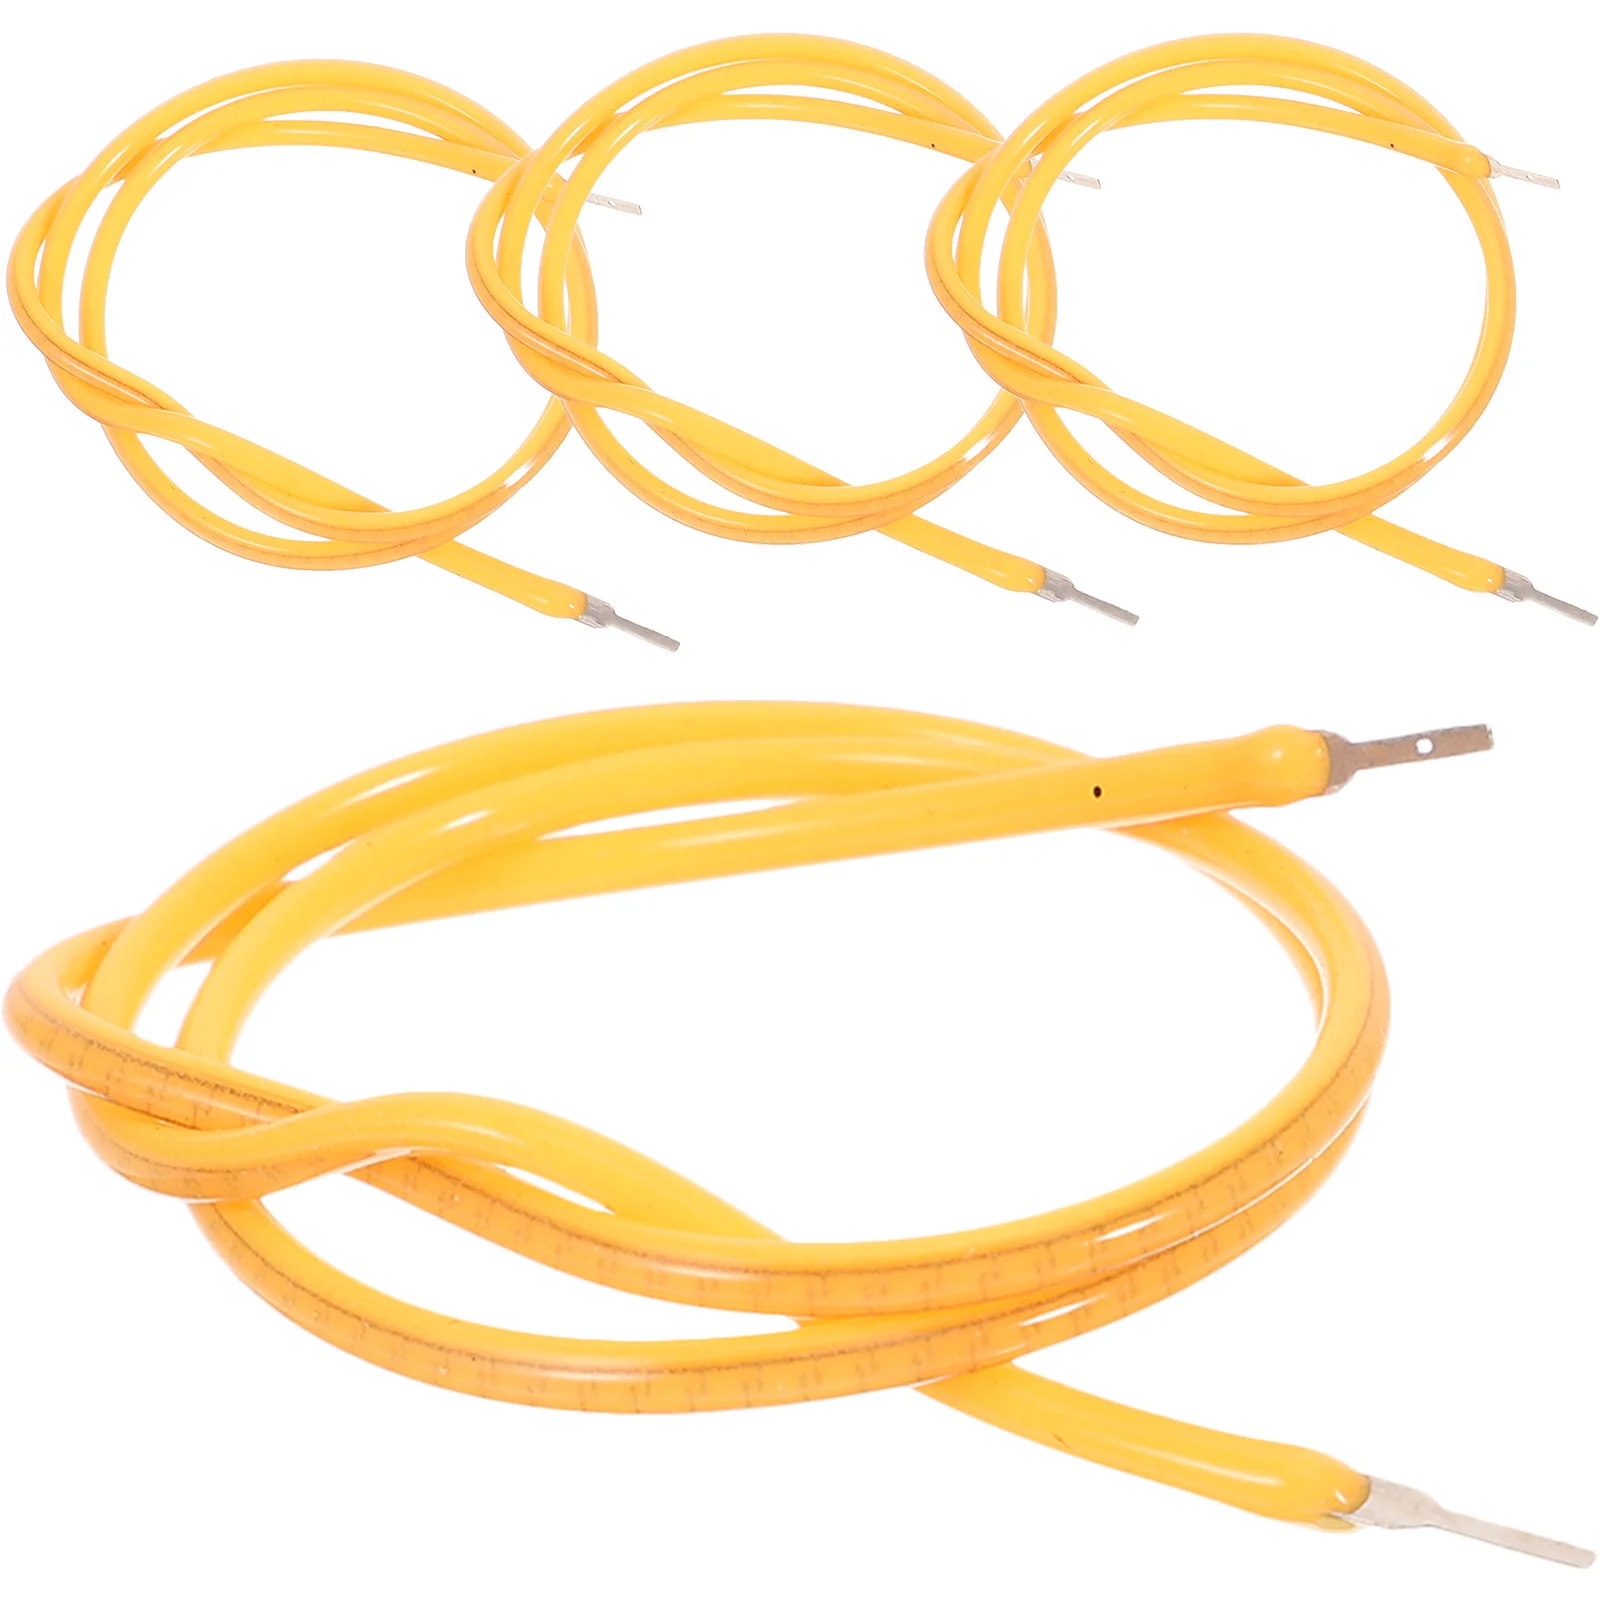 

4 Pcs LED Filament 300mm Diode for Repair Bulb Light Fittings Supply Flexible Fixtures Source Lamp Accessories Part